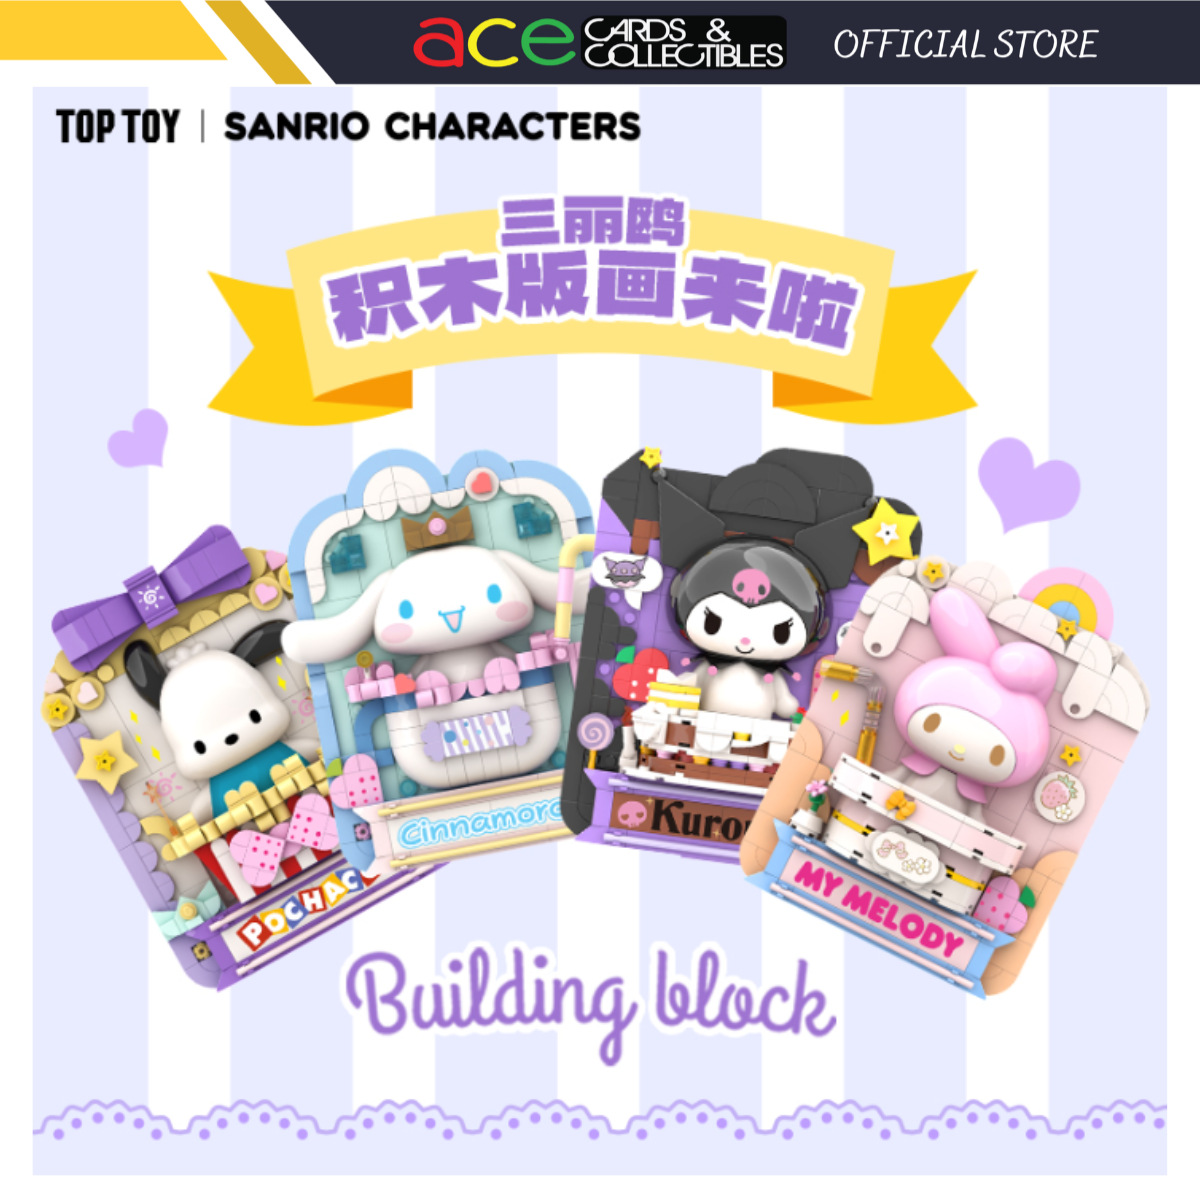 Top Toy x Sanrio Characters Building Blocks Print-Pochacco-TopToy-Ace Cards &amp; Collectibles